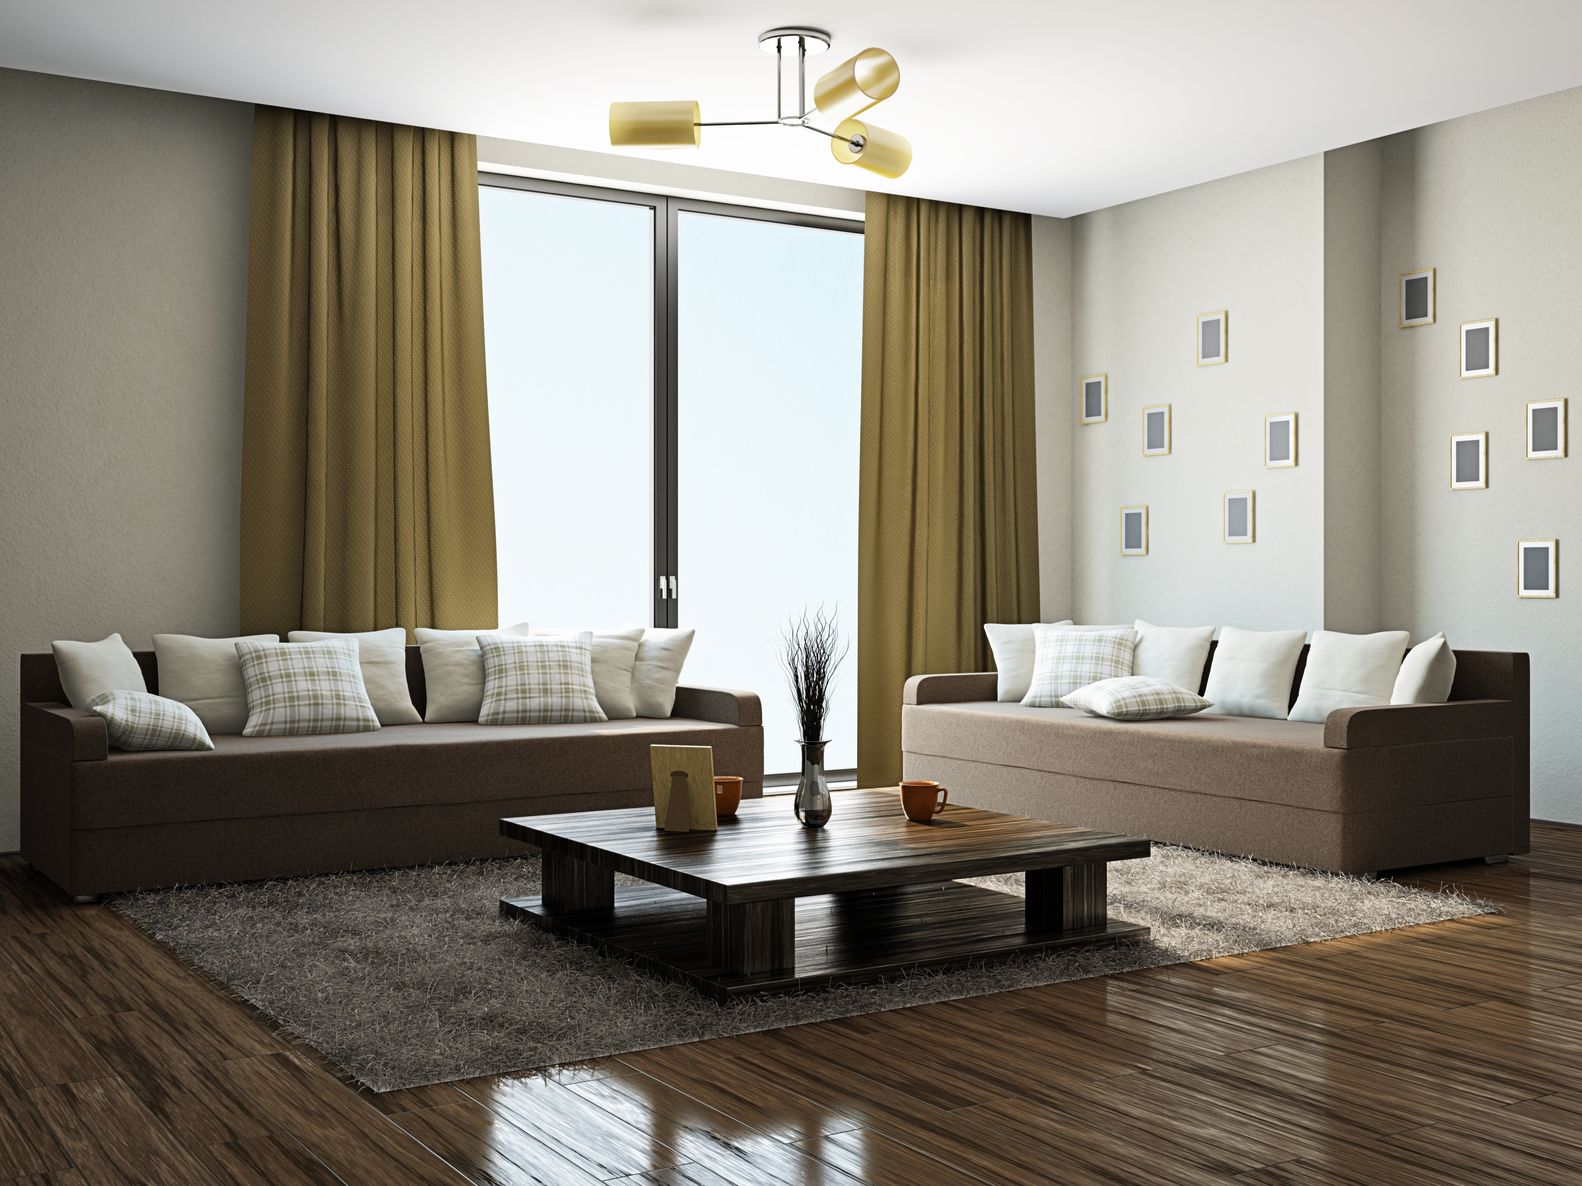 Modern Living Double Exciting Modern Living Room With Double Sofas And Living Room Curtains Completed With Soft Rug And Furnished By Wooden Square Table Living Room Awesome Living Room Curtains Designs